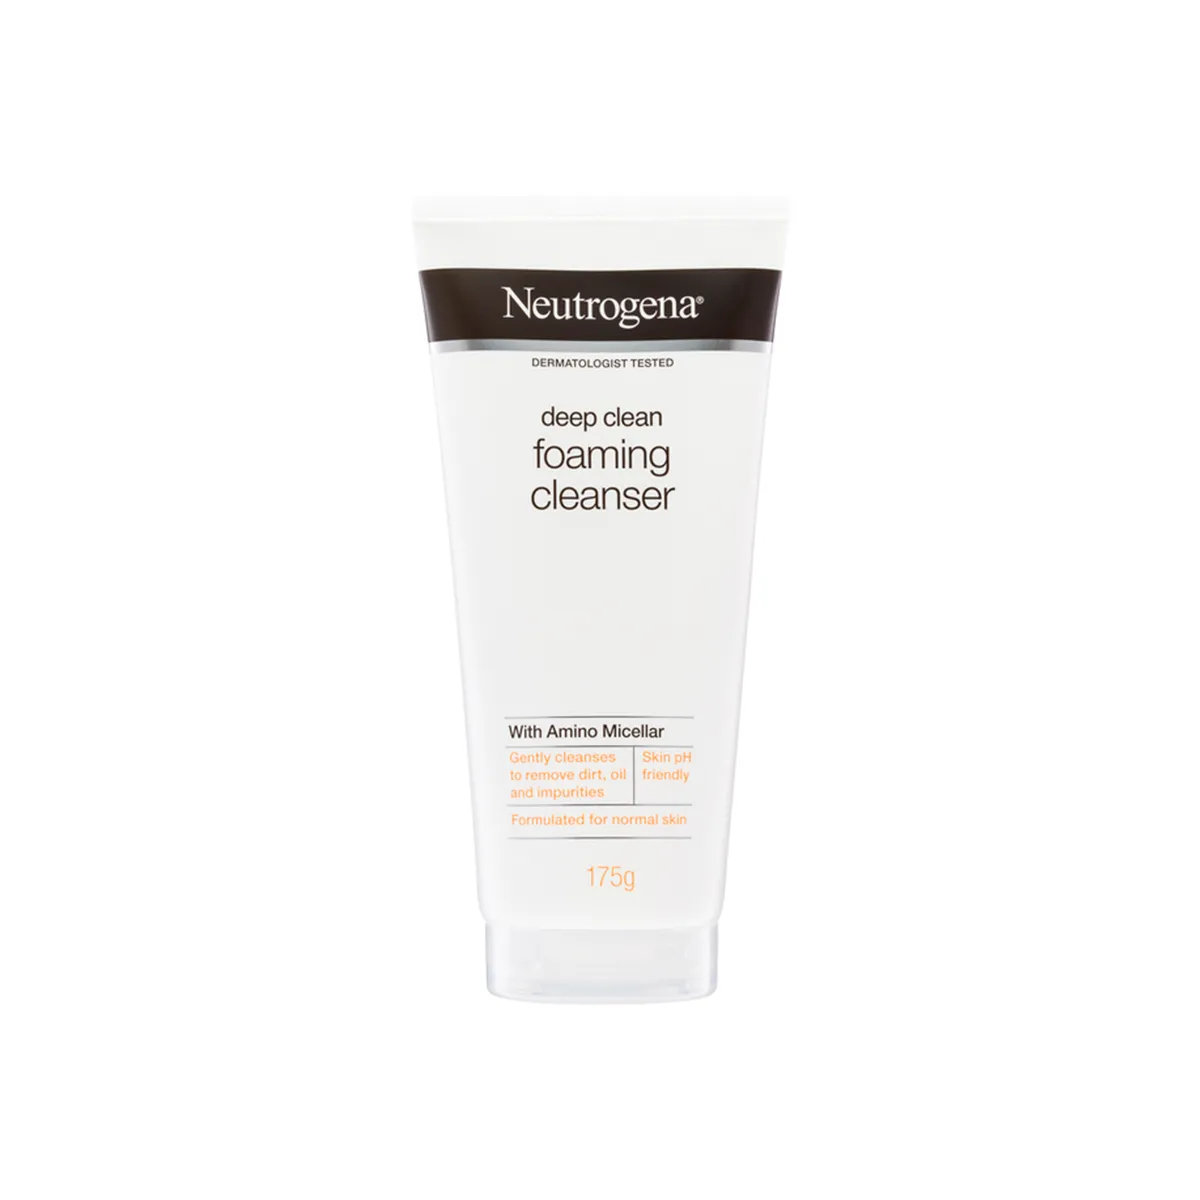 First product image of Neutrogena Foaming Cleanser 175g